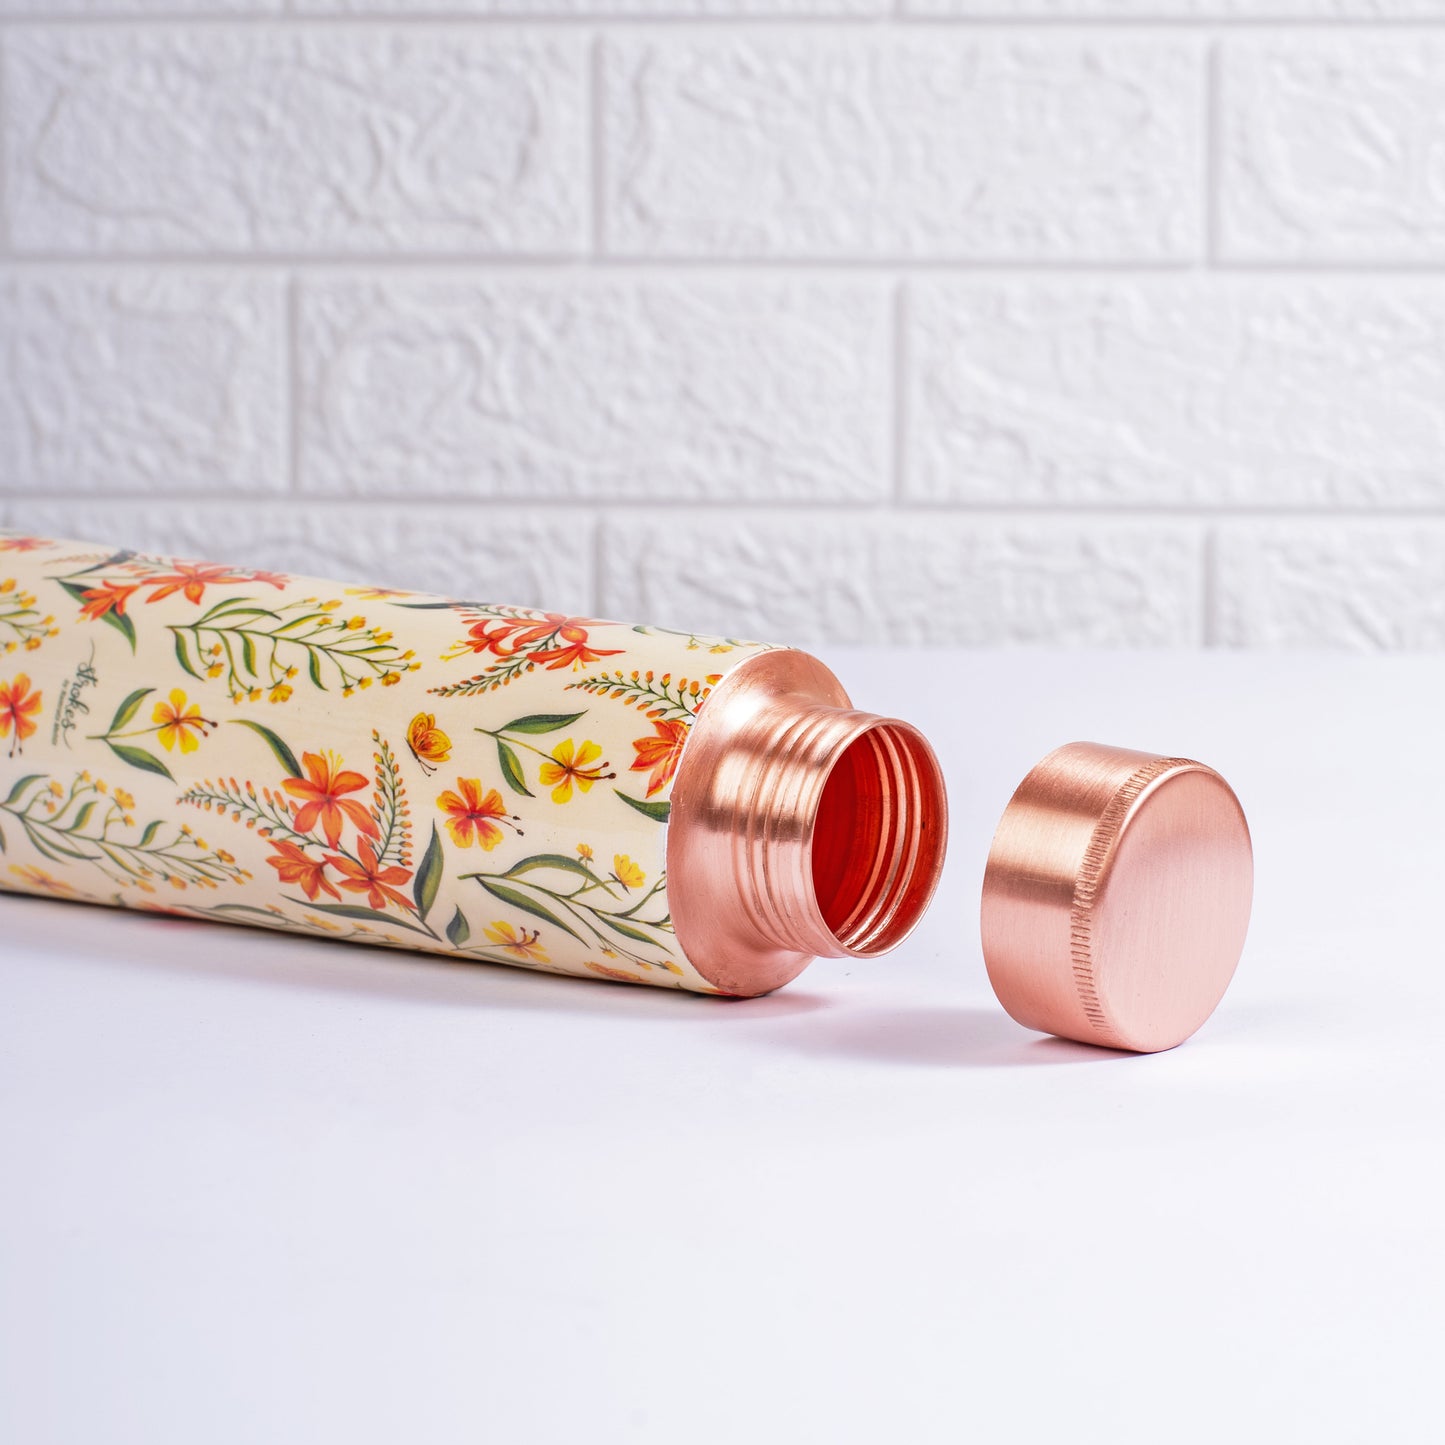 Summer Blossoms Copper Bottle and Tumblers - Gift Set